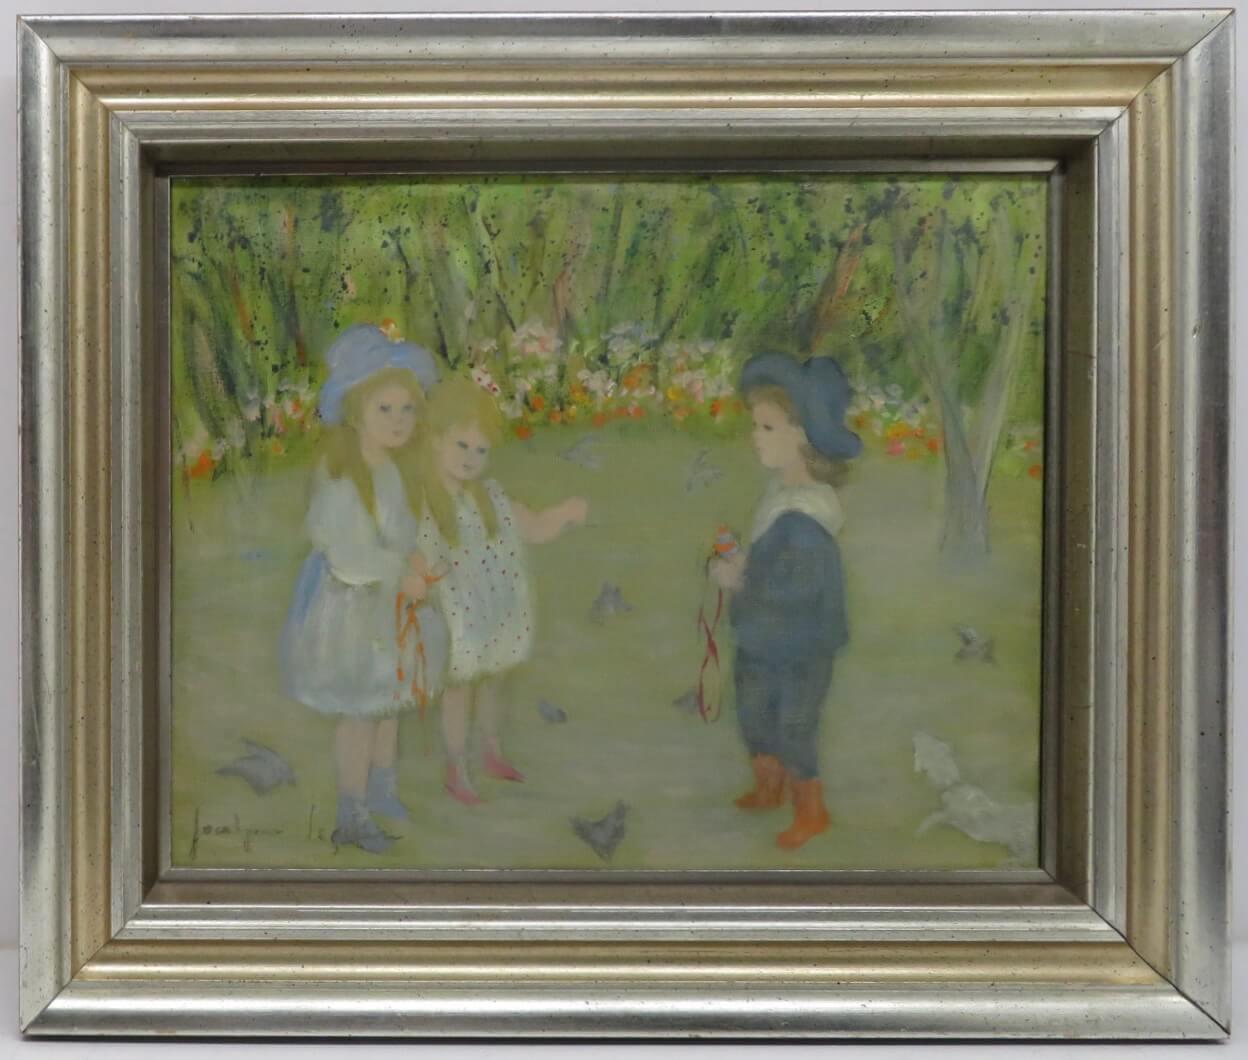 ARTIST: Jocelyne Seguin (1917-1999) French
TITLE:  'Children Playing" 
SIGNED: lower left
MEDIUM: oil on canvas
SIZE: 54cm x 46cm inc frame
CONDITION: excellent 
DETAIL: French painter and lithographer Jocelyne Seguin was born in 1917 and her style